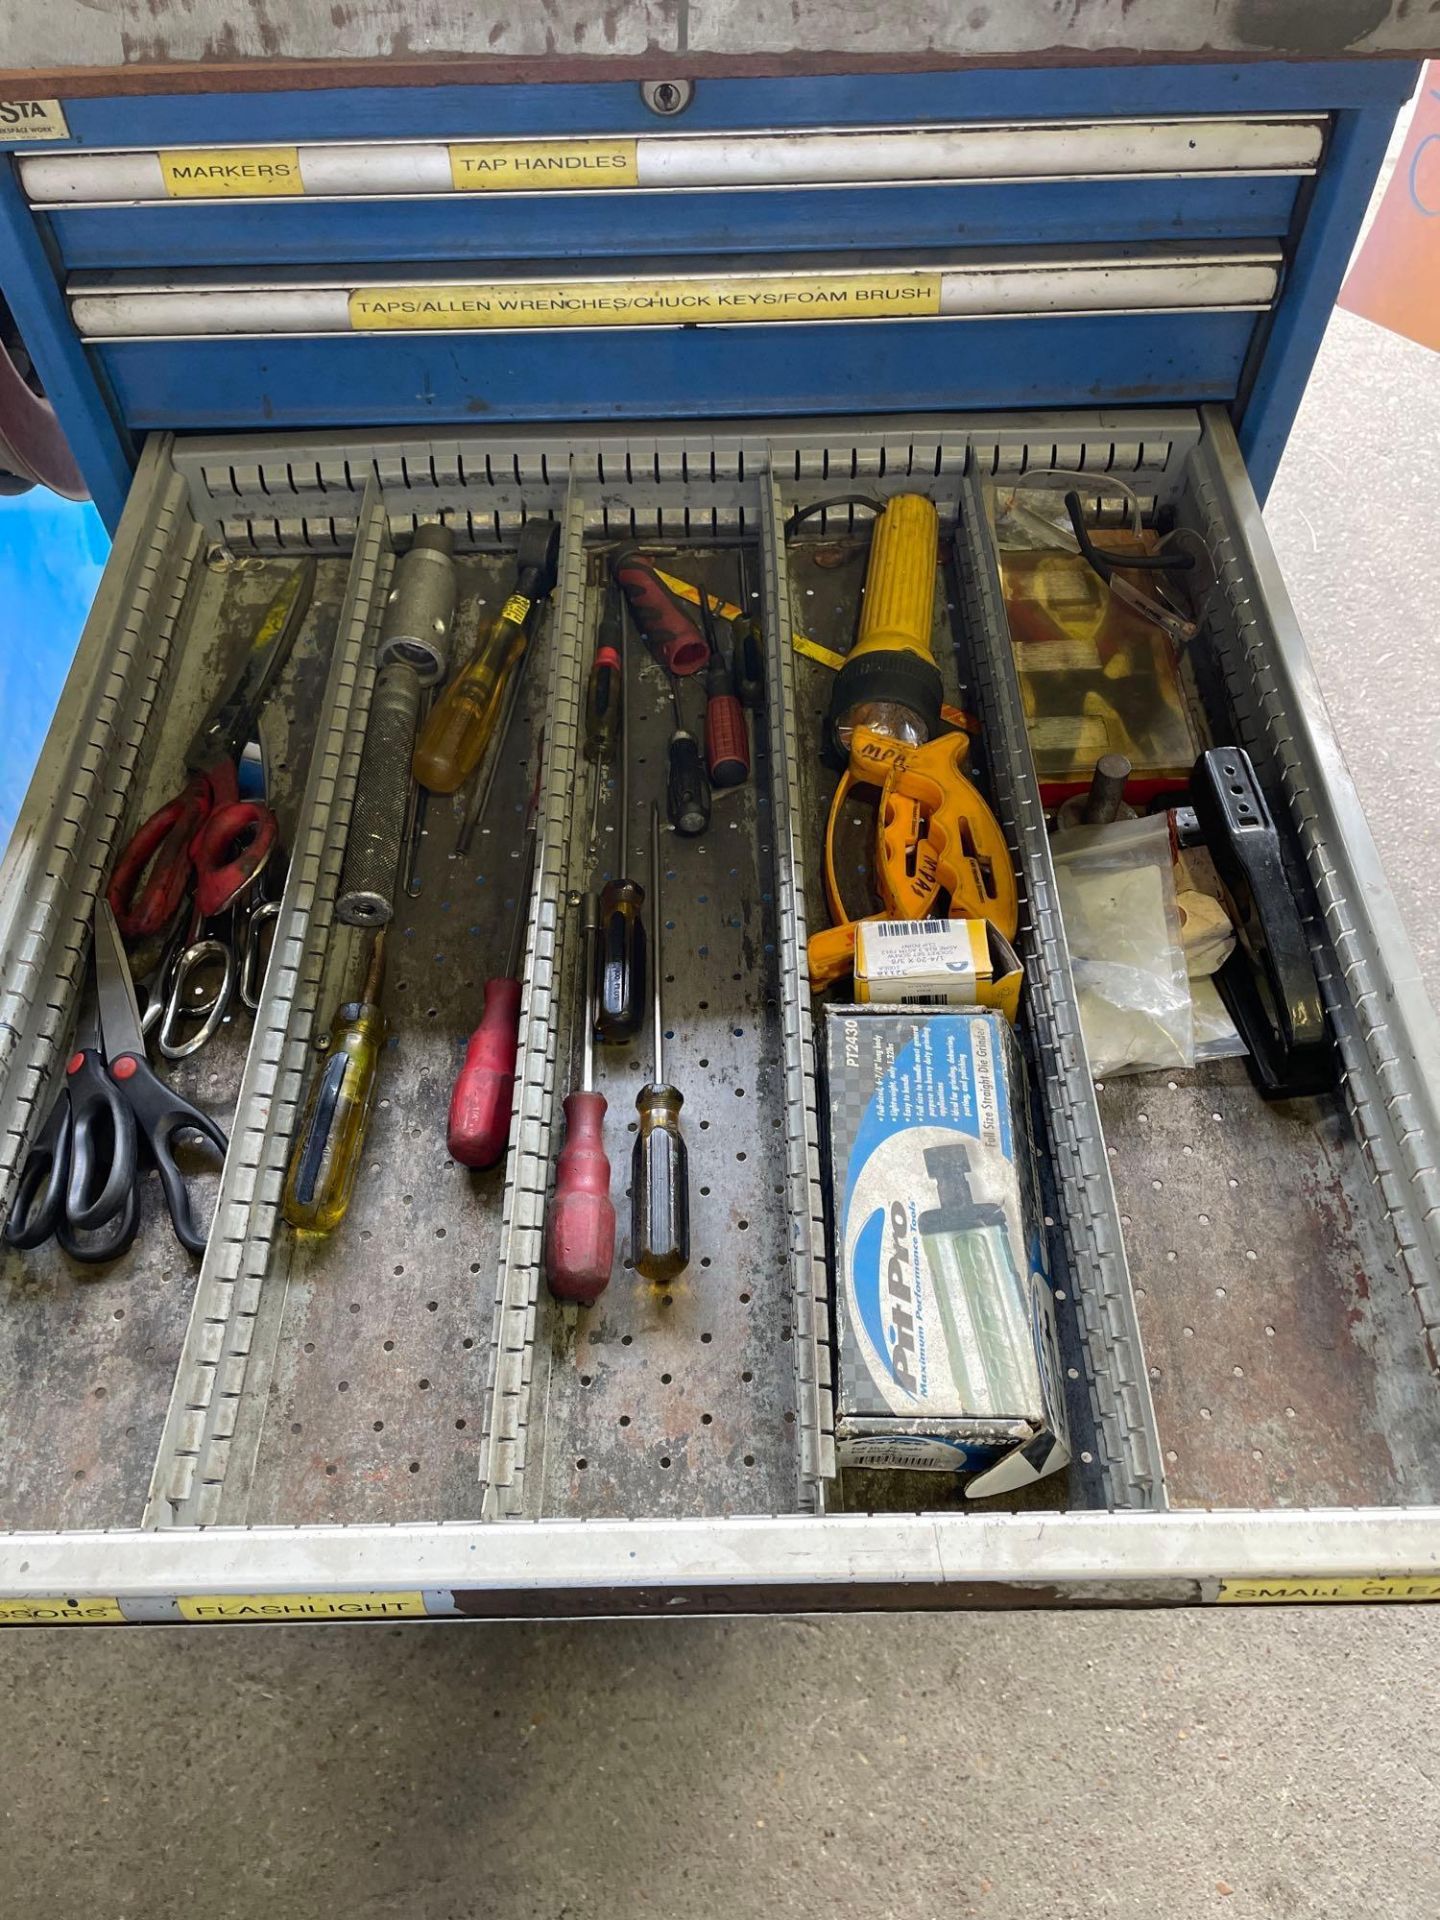 12 Drawer Work Table with Air Hose Reel on Base, with miscellaneous hand tools, taps, drill bits, Al - Image 21 of 32